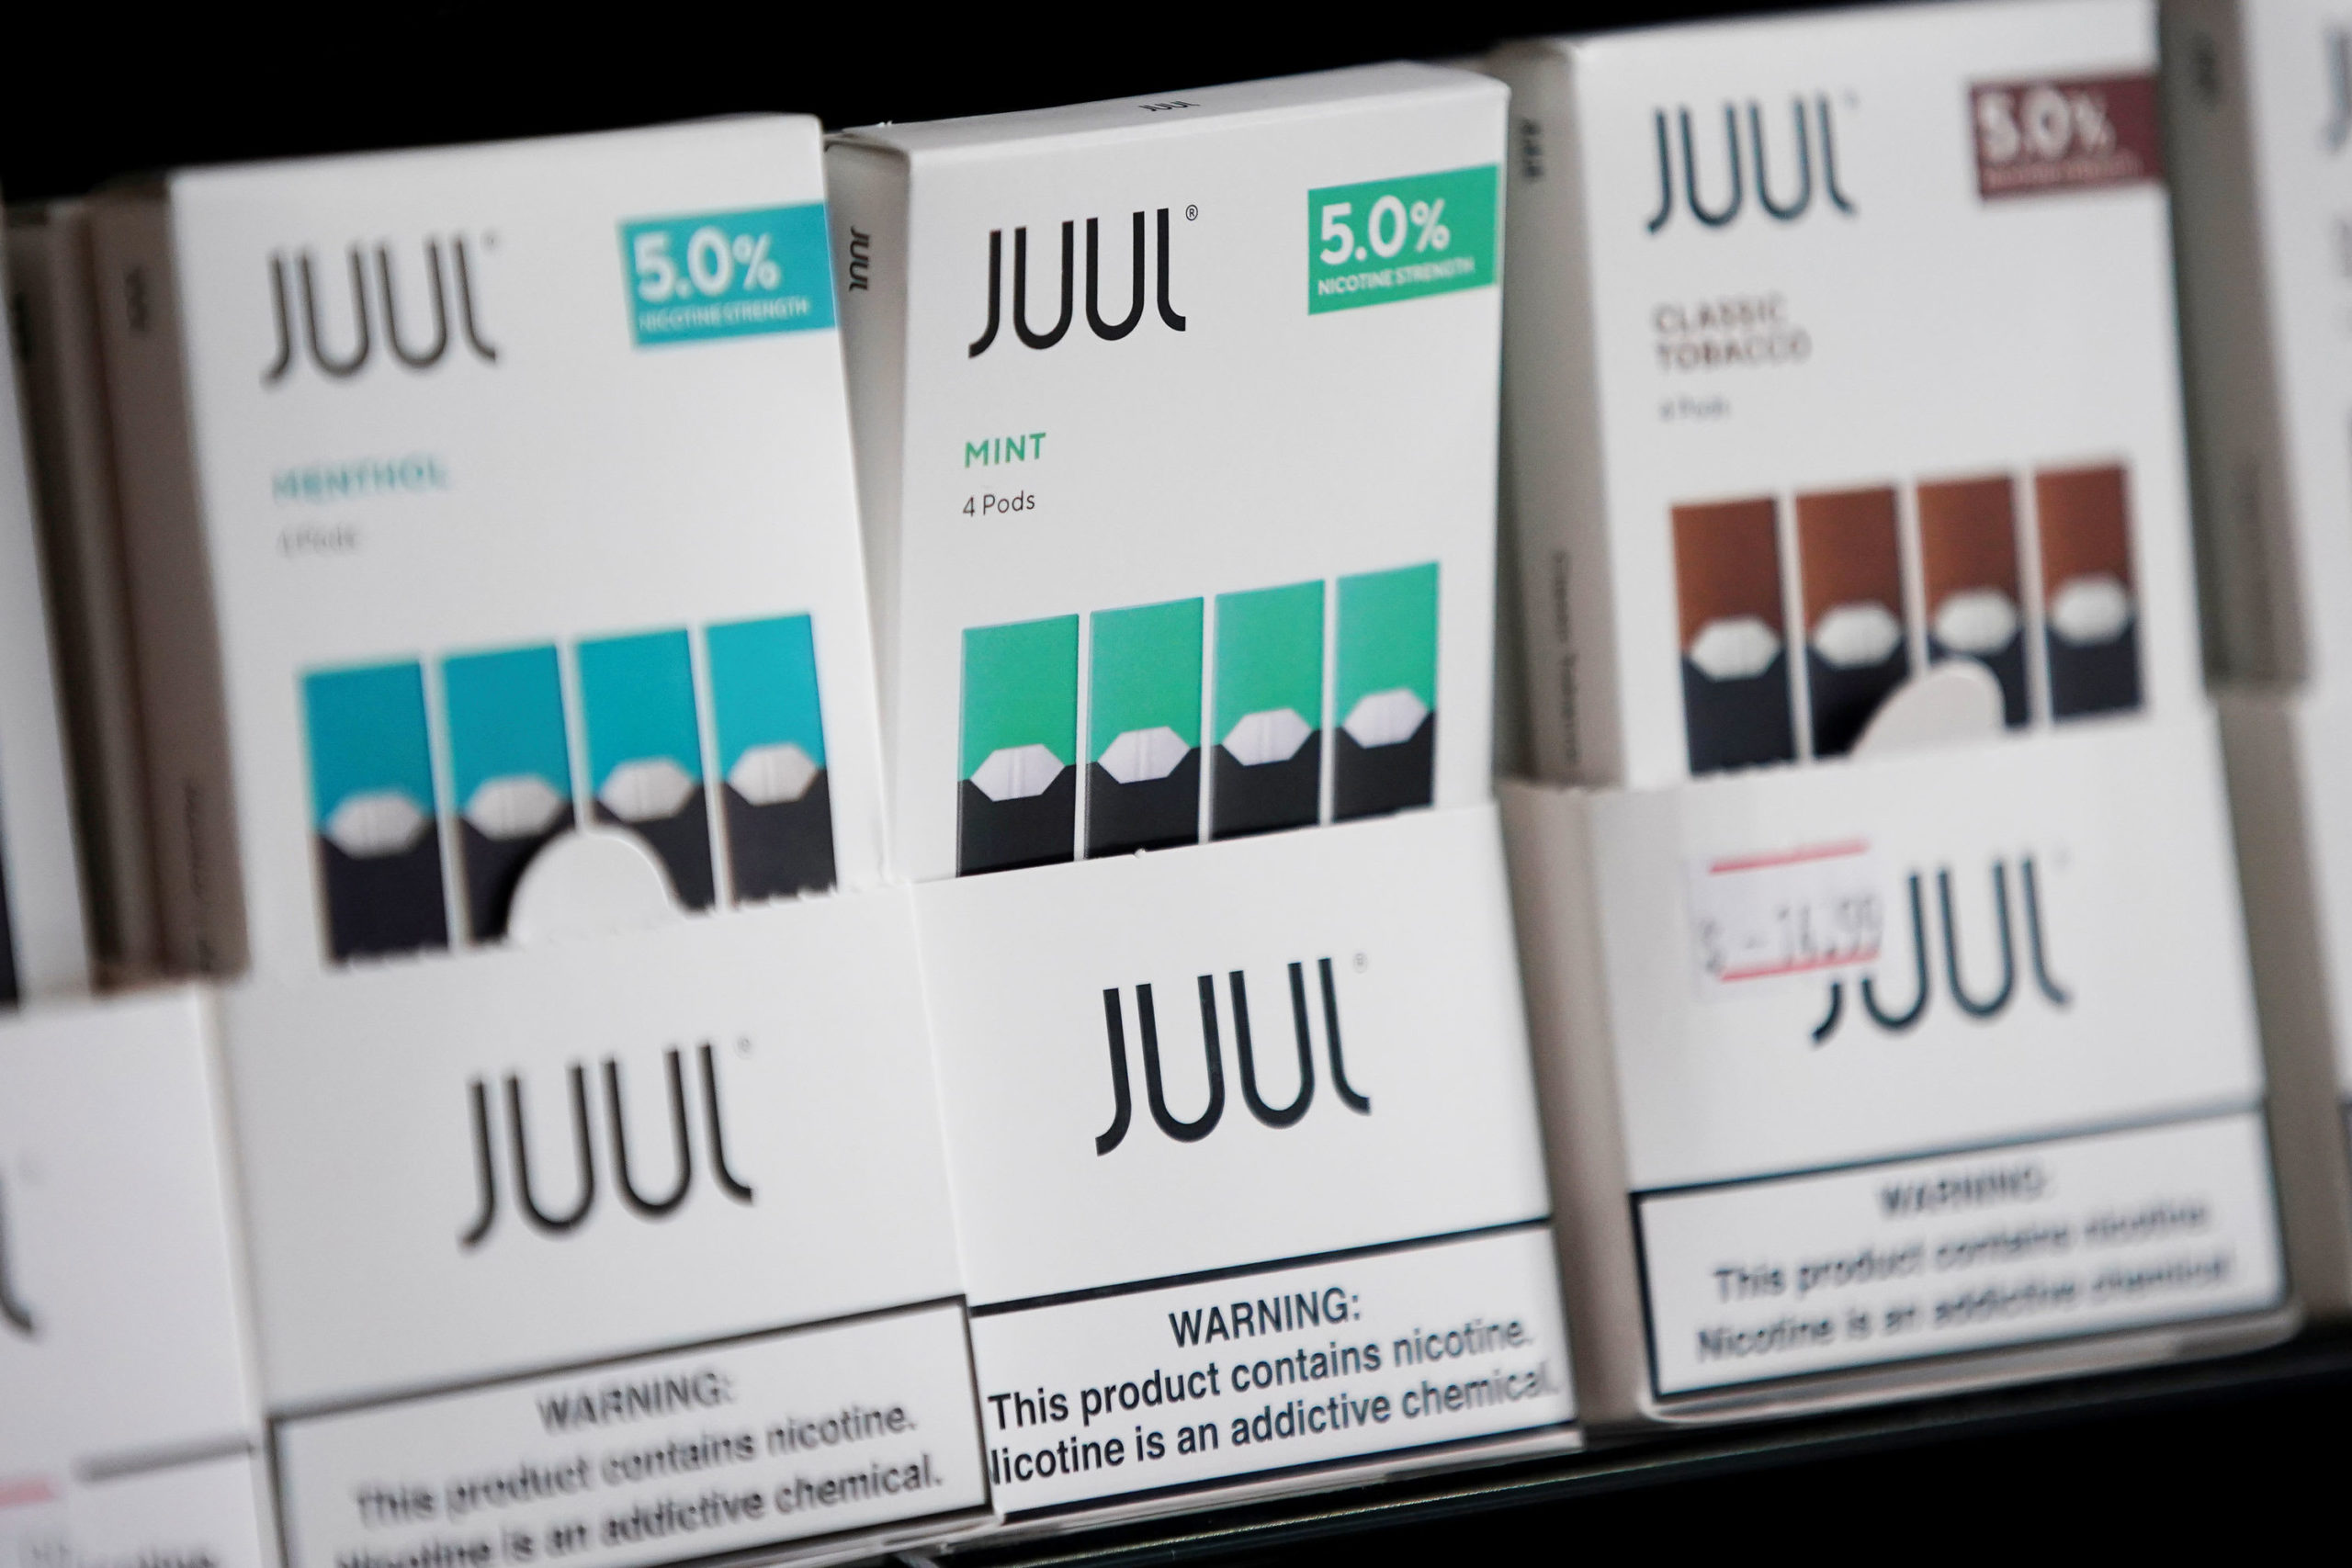 SEC reportedly probing Altria’s Juul funding